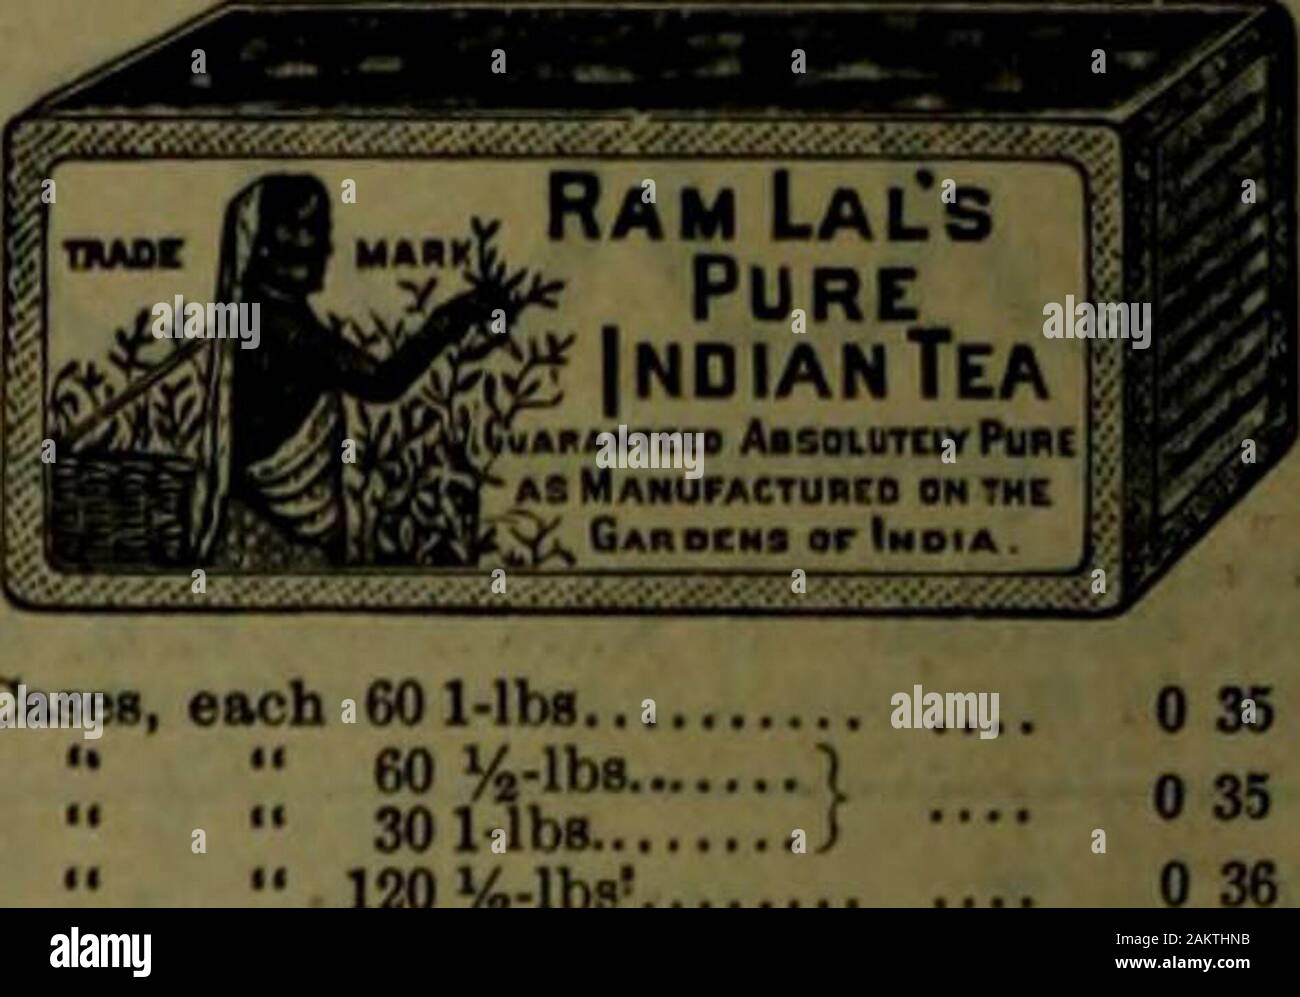 Canadian grocer July-December 1898 . Green Label, Is and %s o 22 Blue Label. Is and y,s and %s... 0 30 Red Label, Is and %s 0 36 Gold Label, %s 0 44 Terms, 30 days net. RAM LALs (lead packages) TEAS. SALADA CEYLON. Brown Label, ls ft%« —wholesale2uc, retail 25c. Wholesale Retail.0 300 400 50060. Cases, each 60 1-lbs... 60 %-lbs.. 301-lbs... 120 %-lbs. Stock Photo